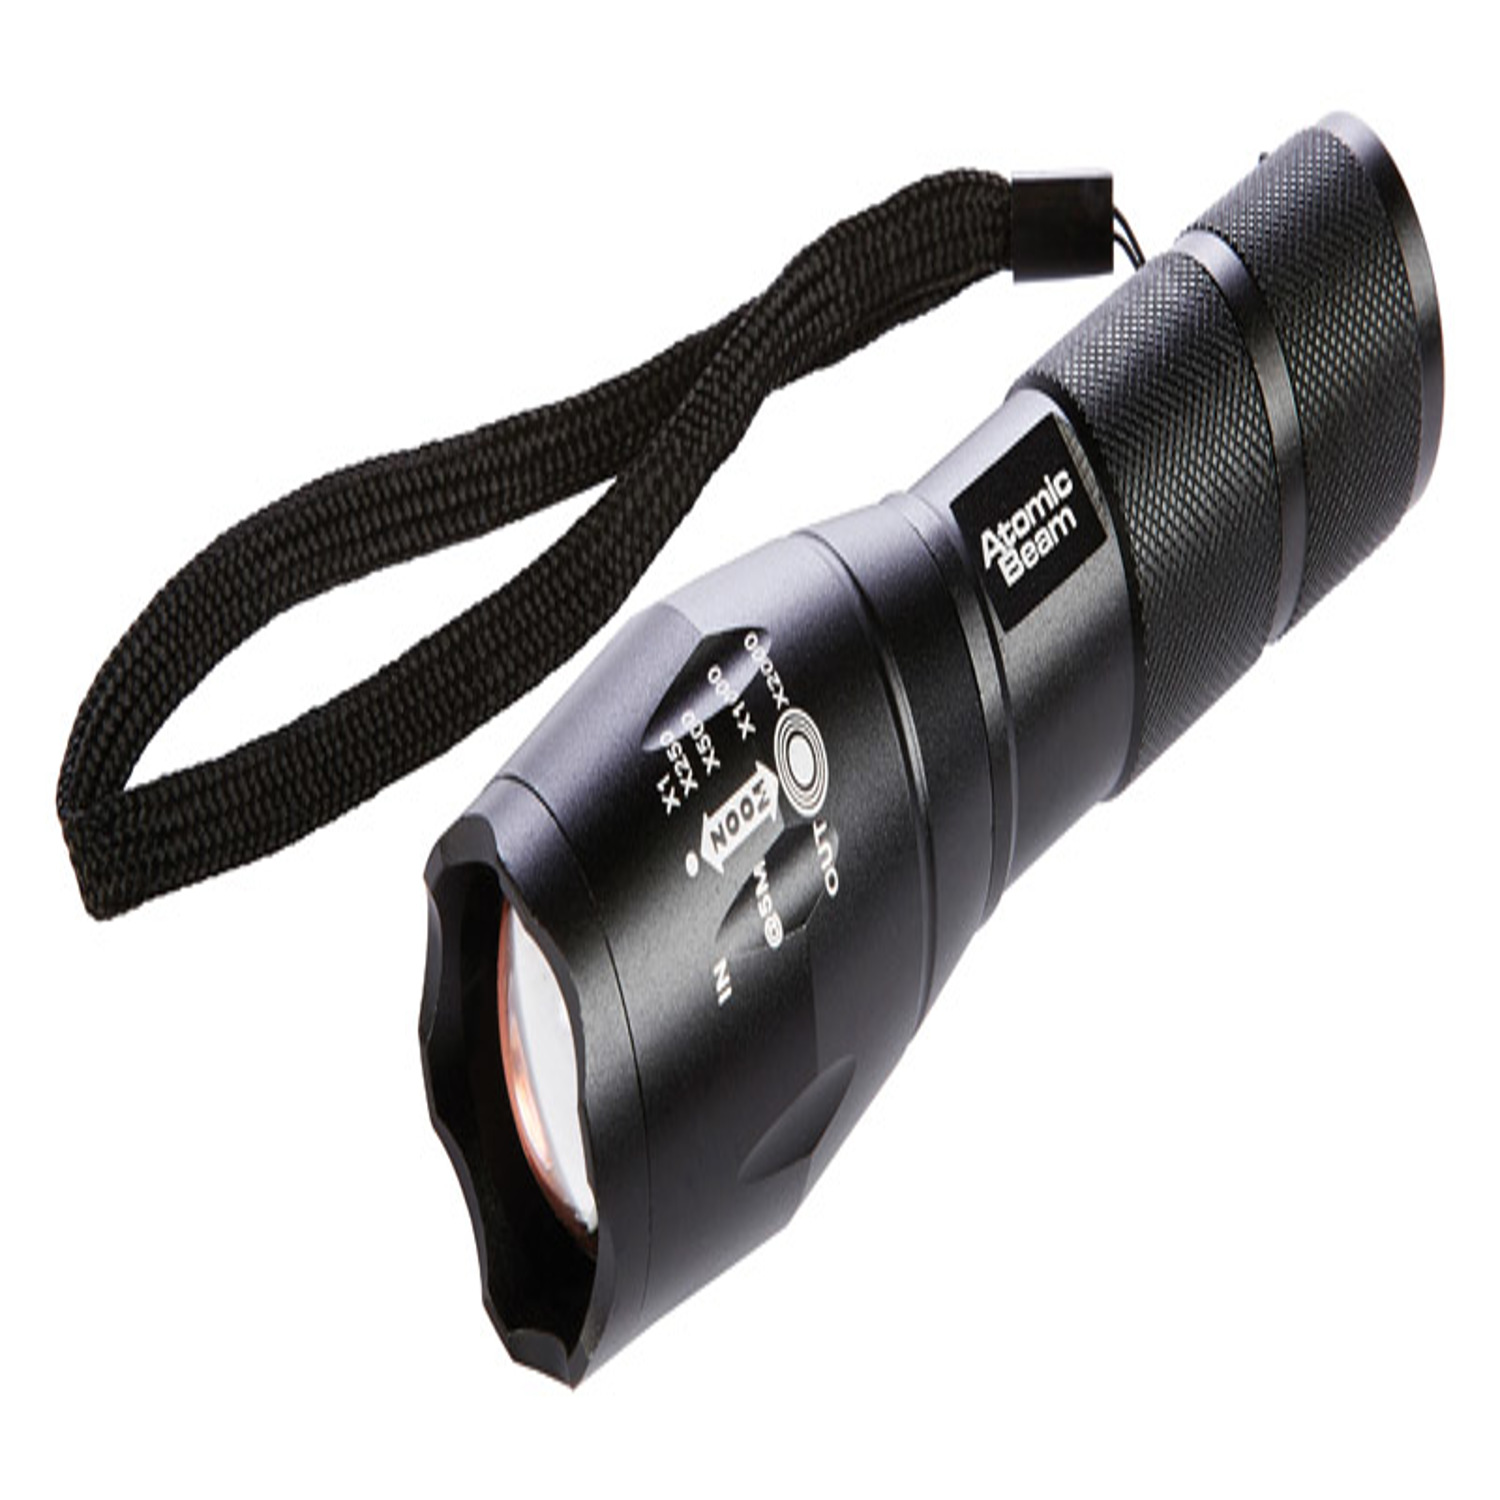 Atomic Beam LED Flashlight by BulbHead, 5 Beam Modes, Tactical Light Bright  Flashlight (1 Pack) 